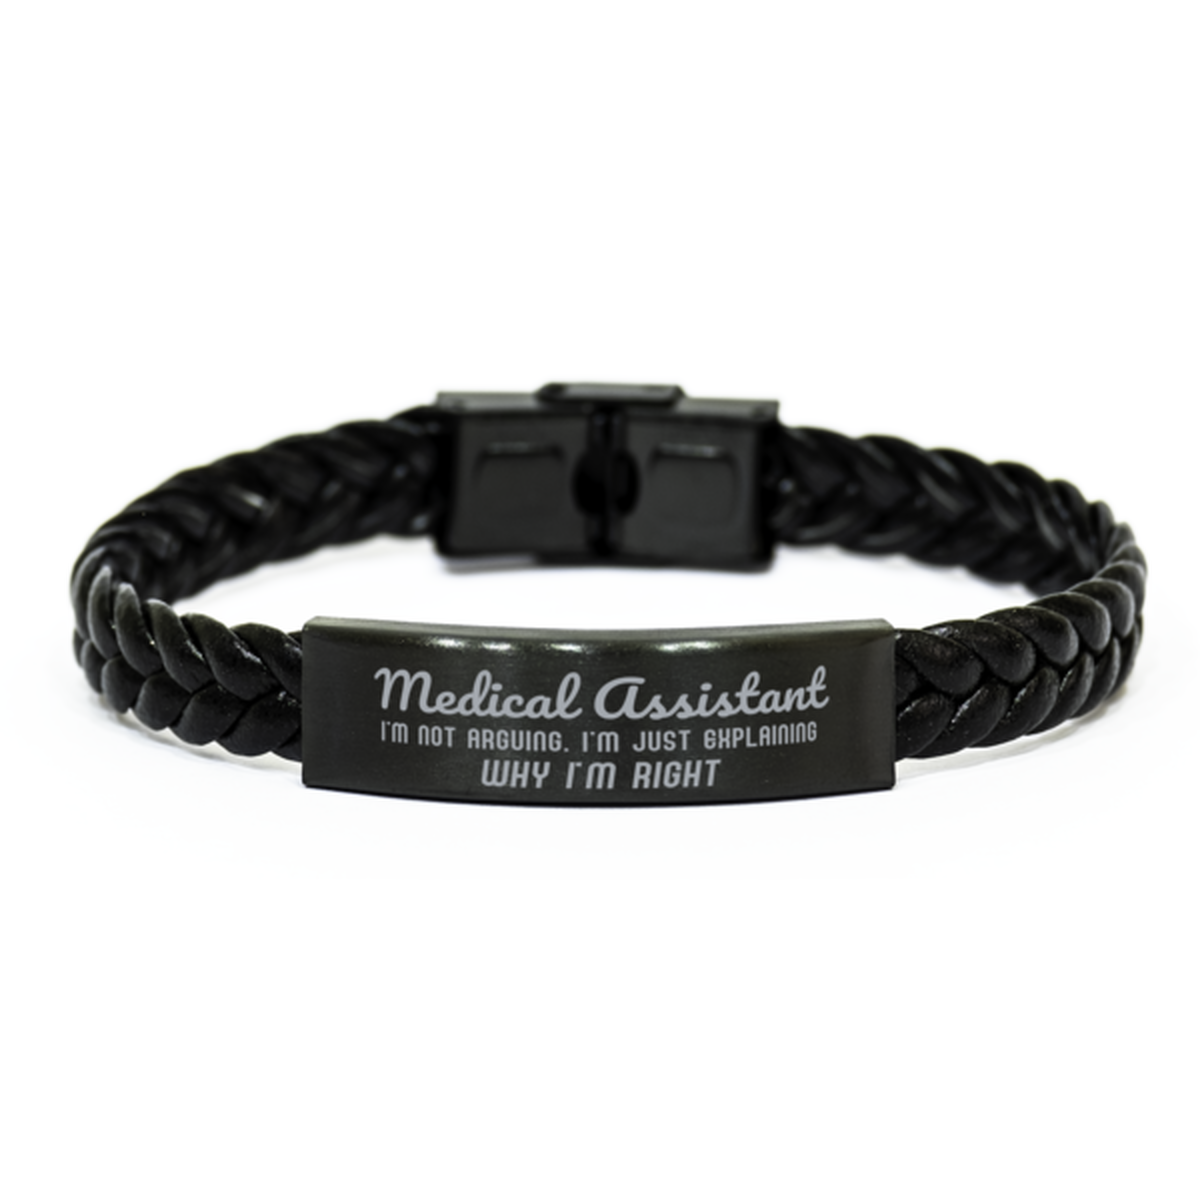 Medical Assistant I'm not Arguing. I'm Just Explaining Why I'm RIGHT Braided Leather Bracelet, Graduation Birthday Christmas Medical Assistant Gifts For Medical Assistant Funny Saying Quote Present for Men Women Coworker